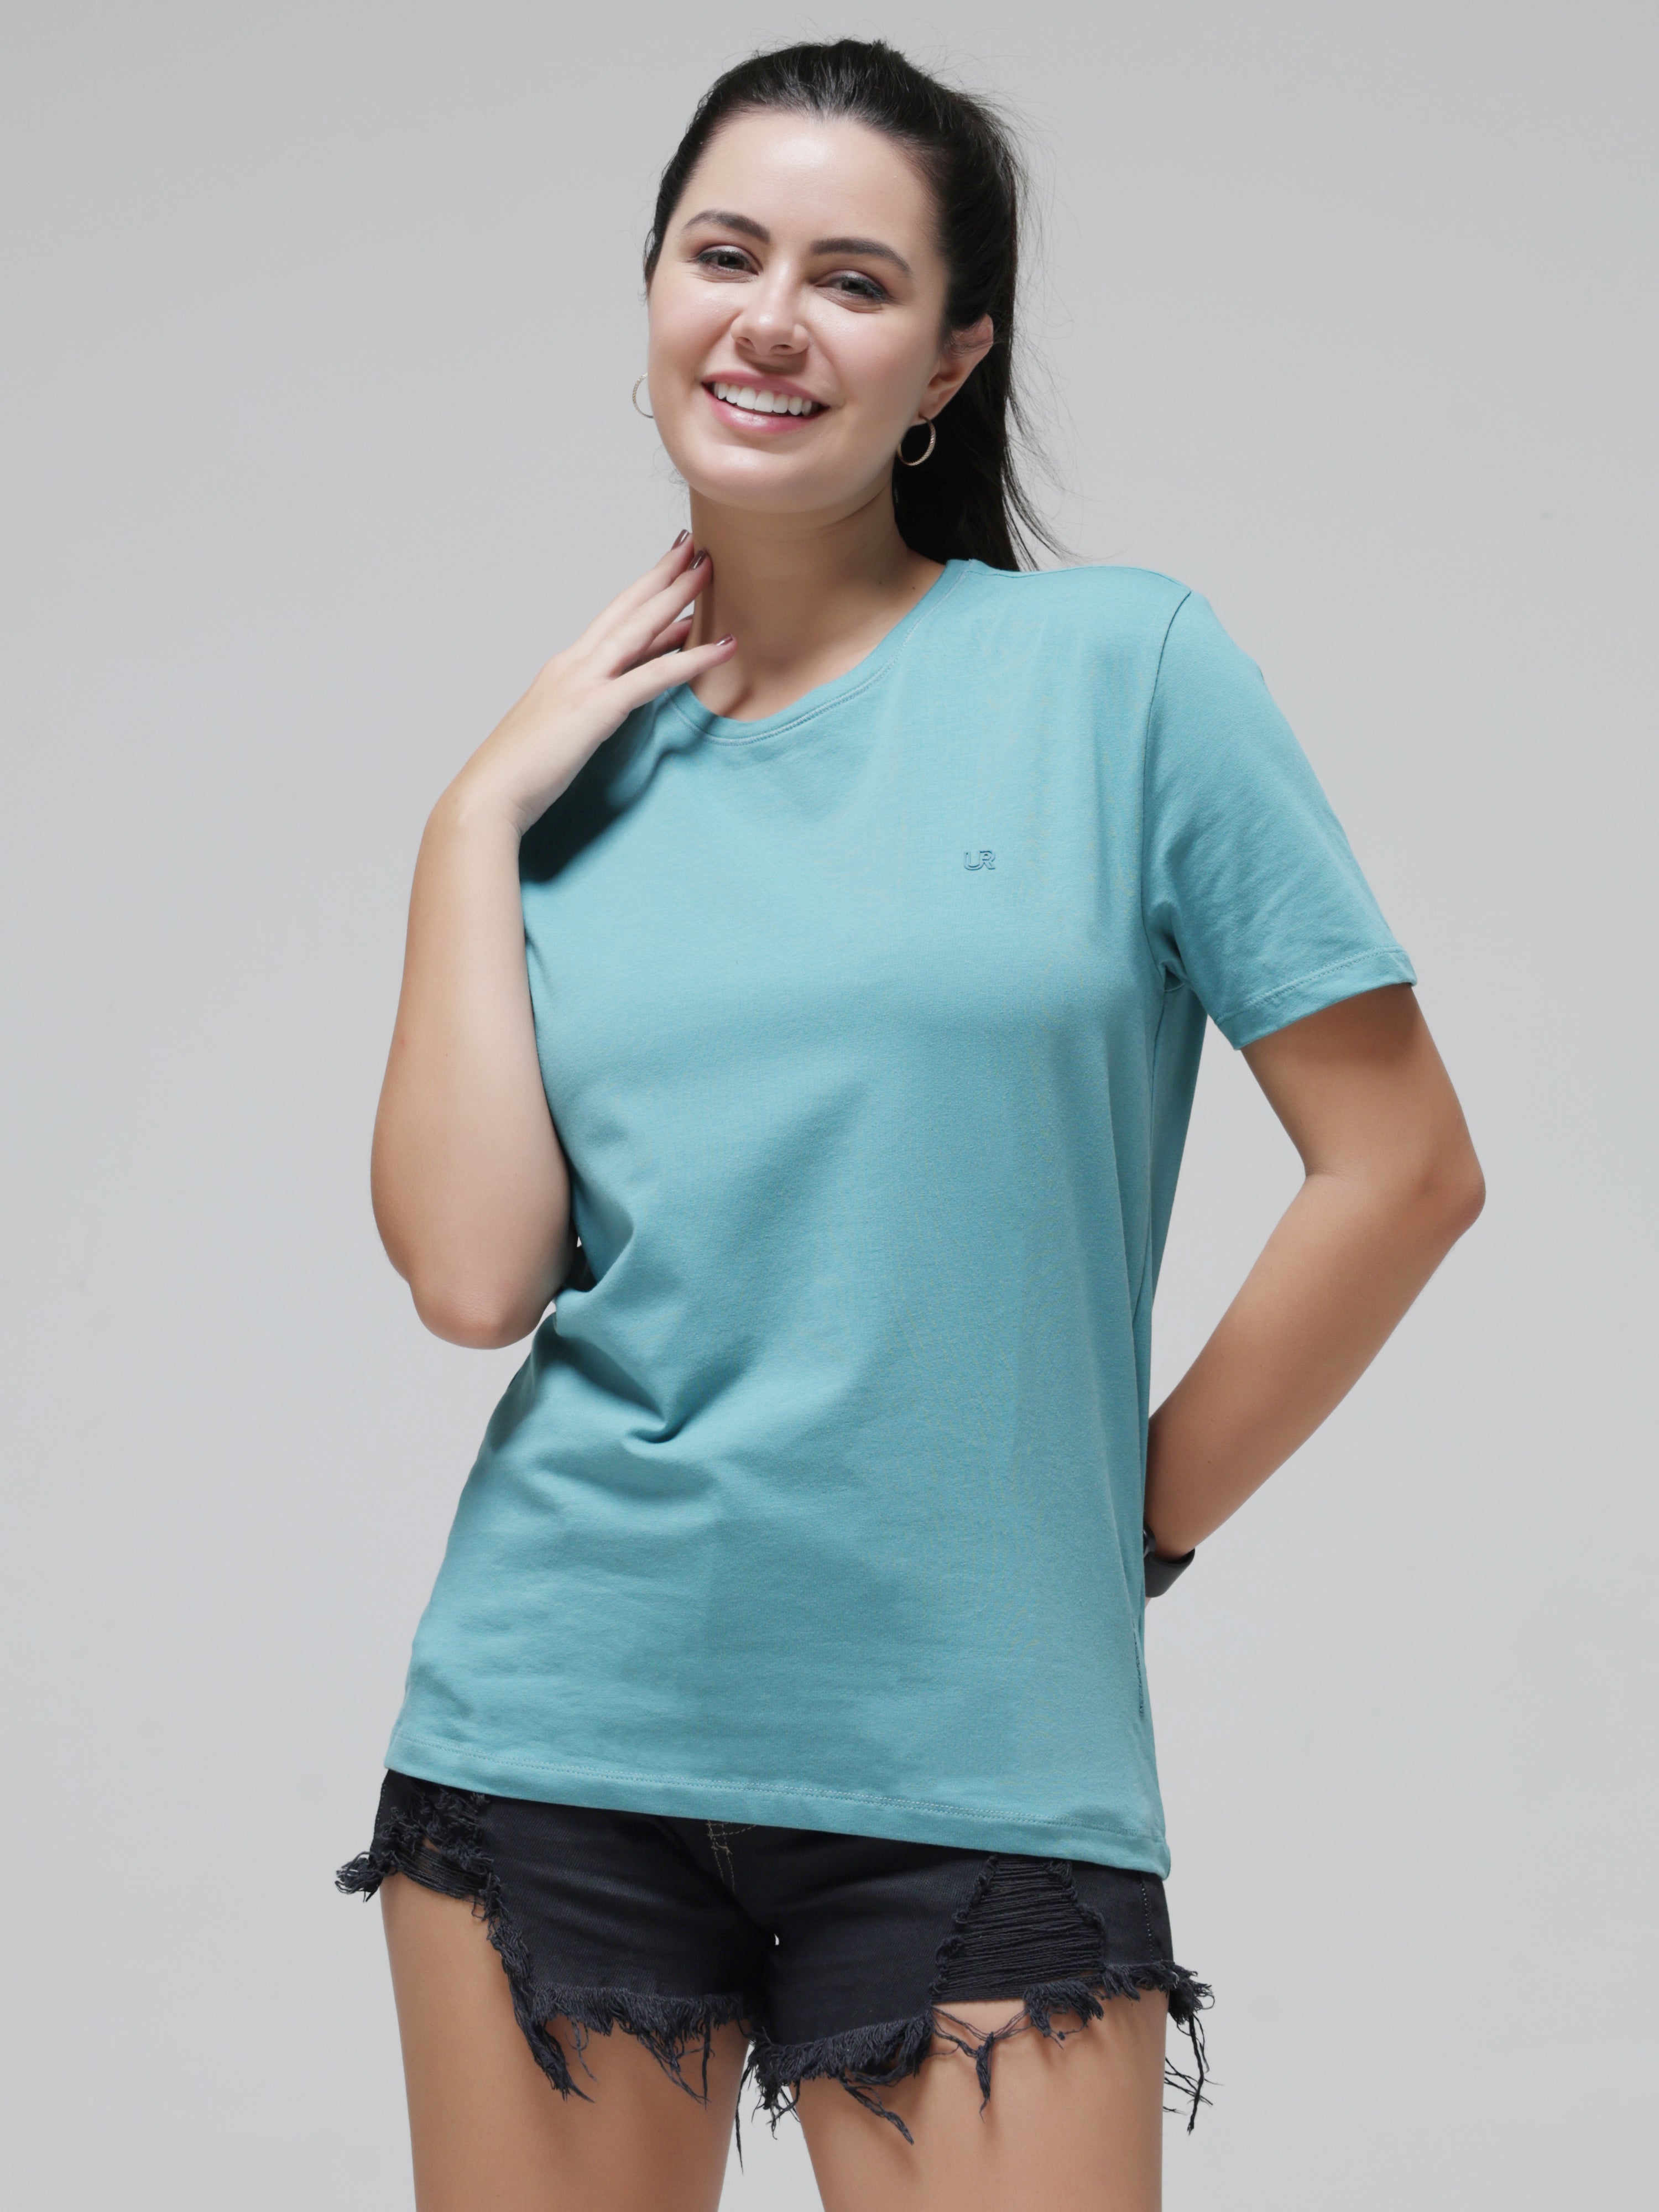 Stylish woman wearing a Turms stain-proof and odor-resistant round-neck T-shirt, color blue, paired with black denim shorts.